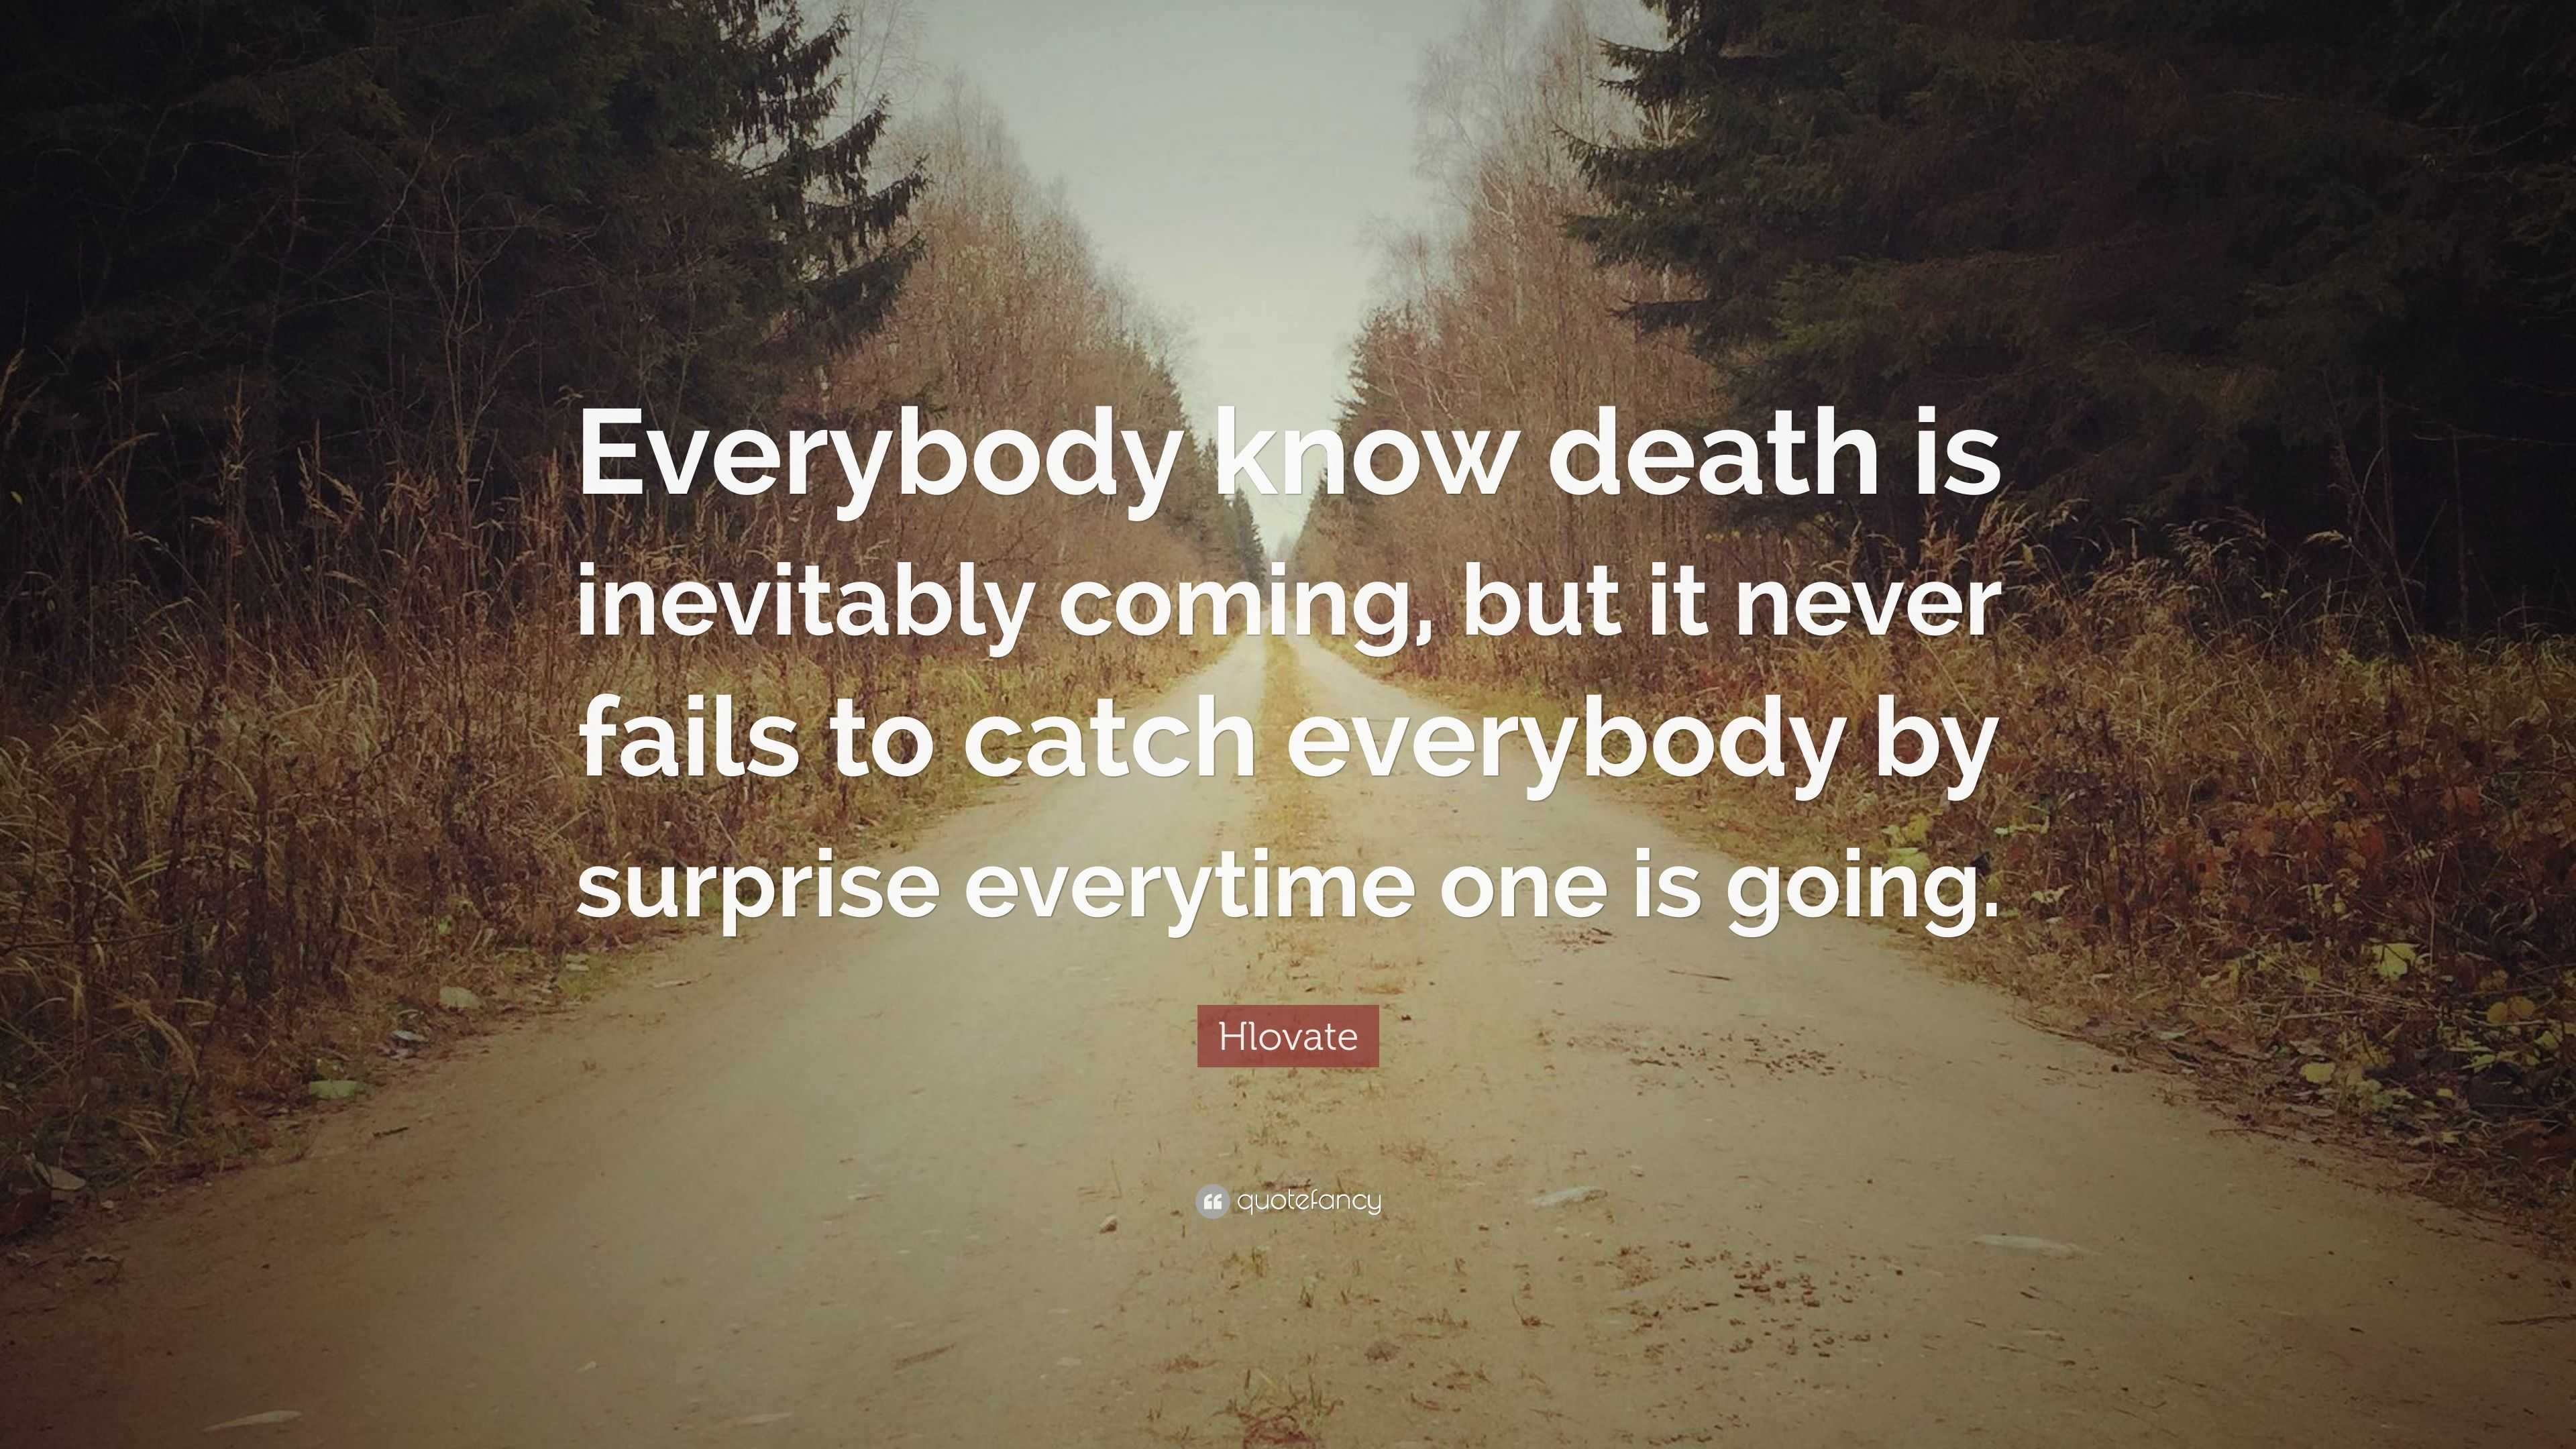 Hlovate Quote “Everybody know is inevitably ing but it never fails to